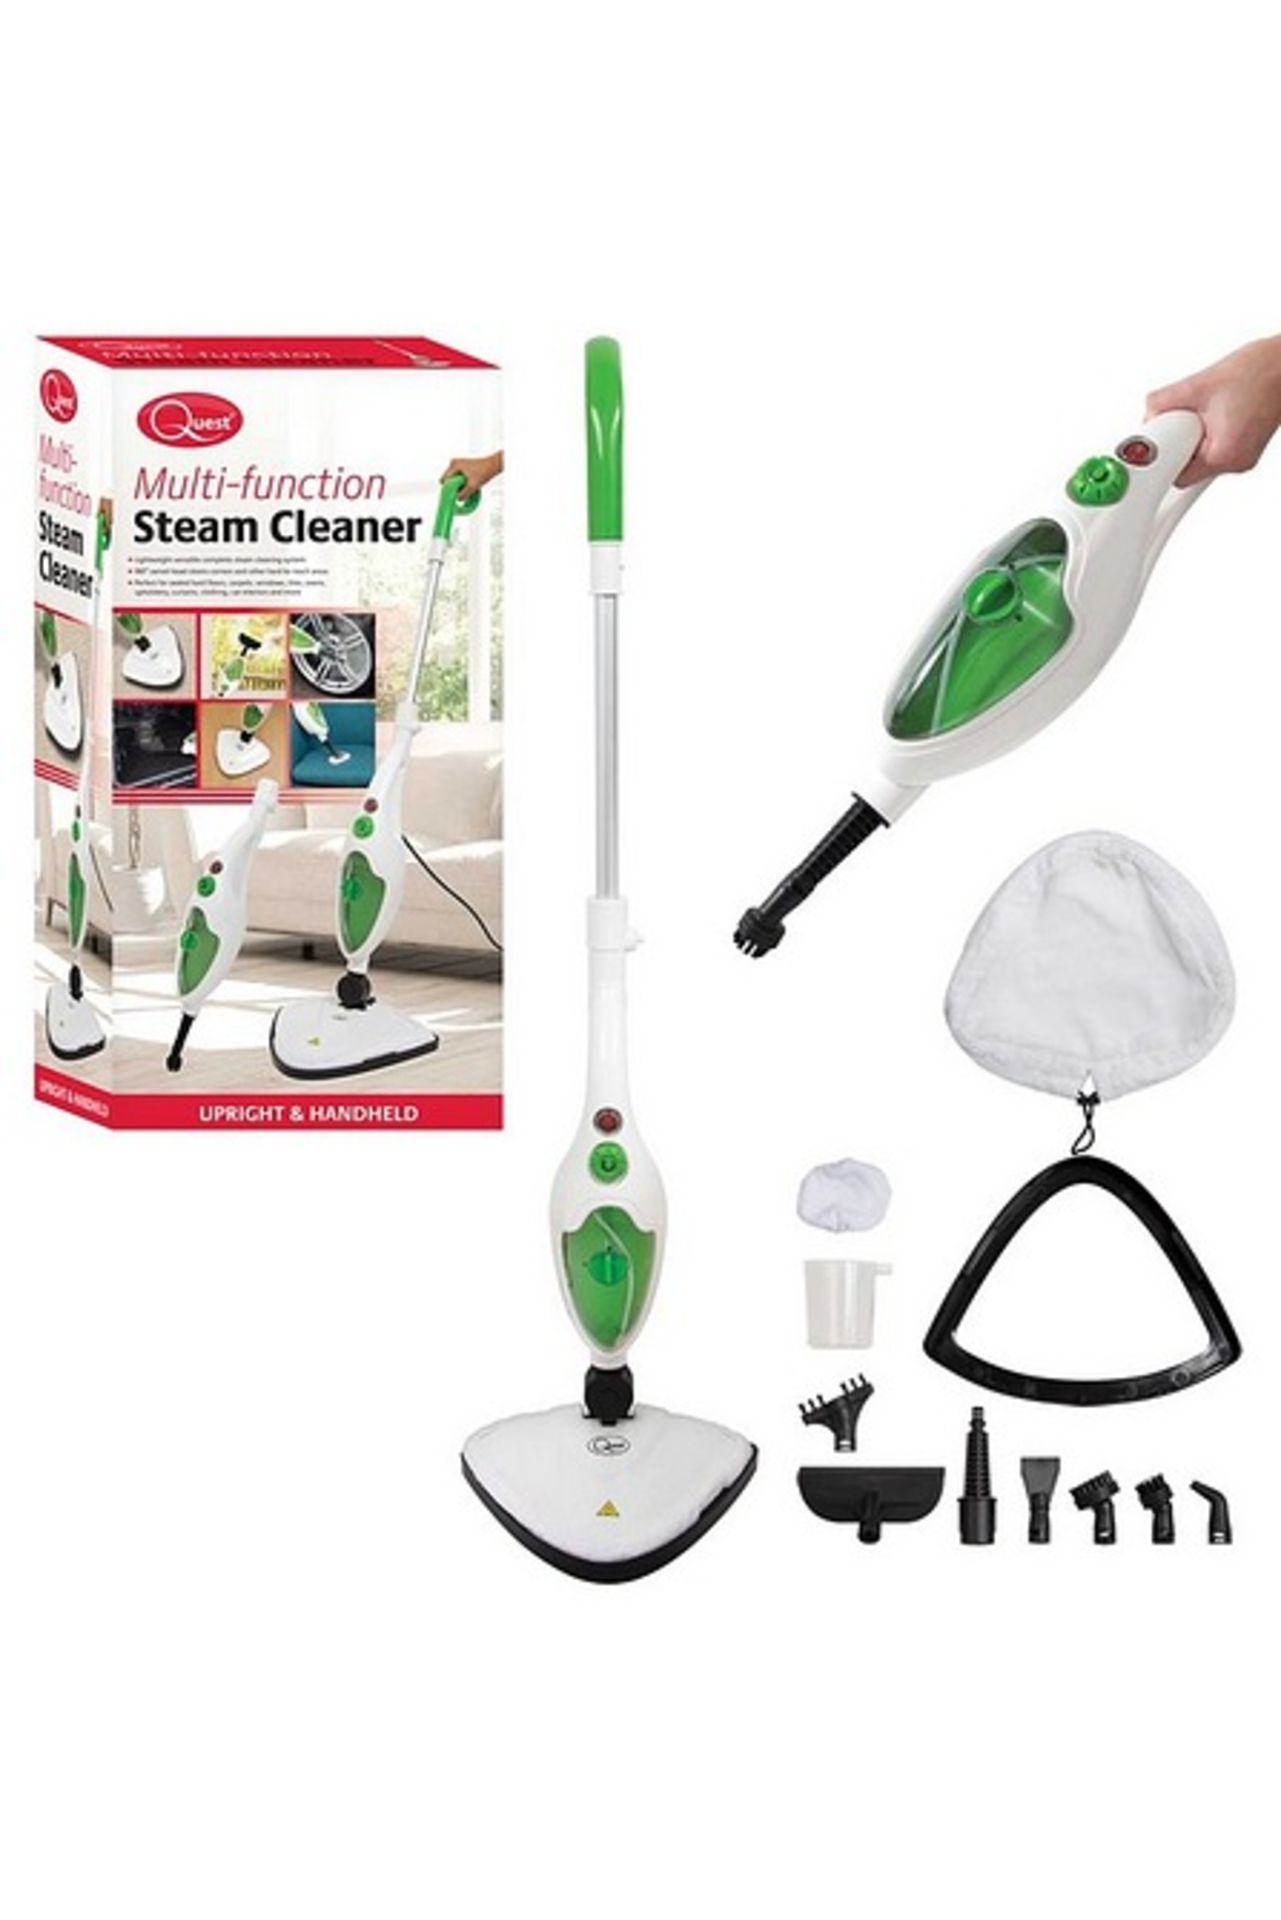 Quest Multi-Function Steam Cleaner - PCK